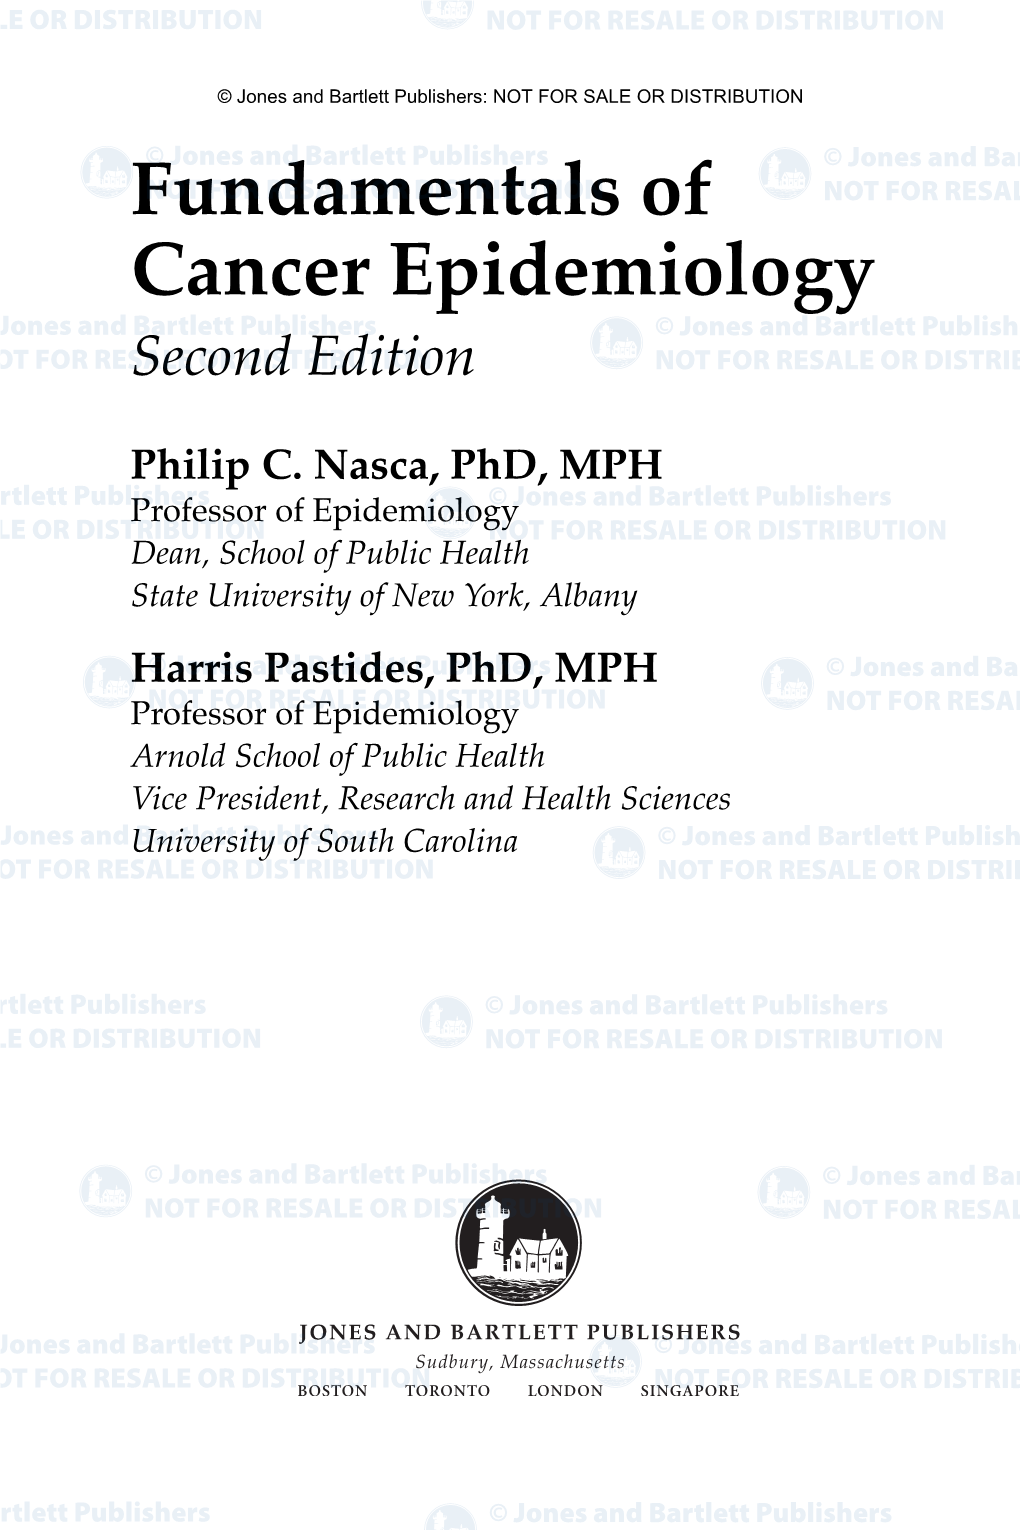 Fundamentals of Cancer Epidemiology Second Edition